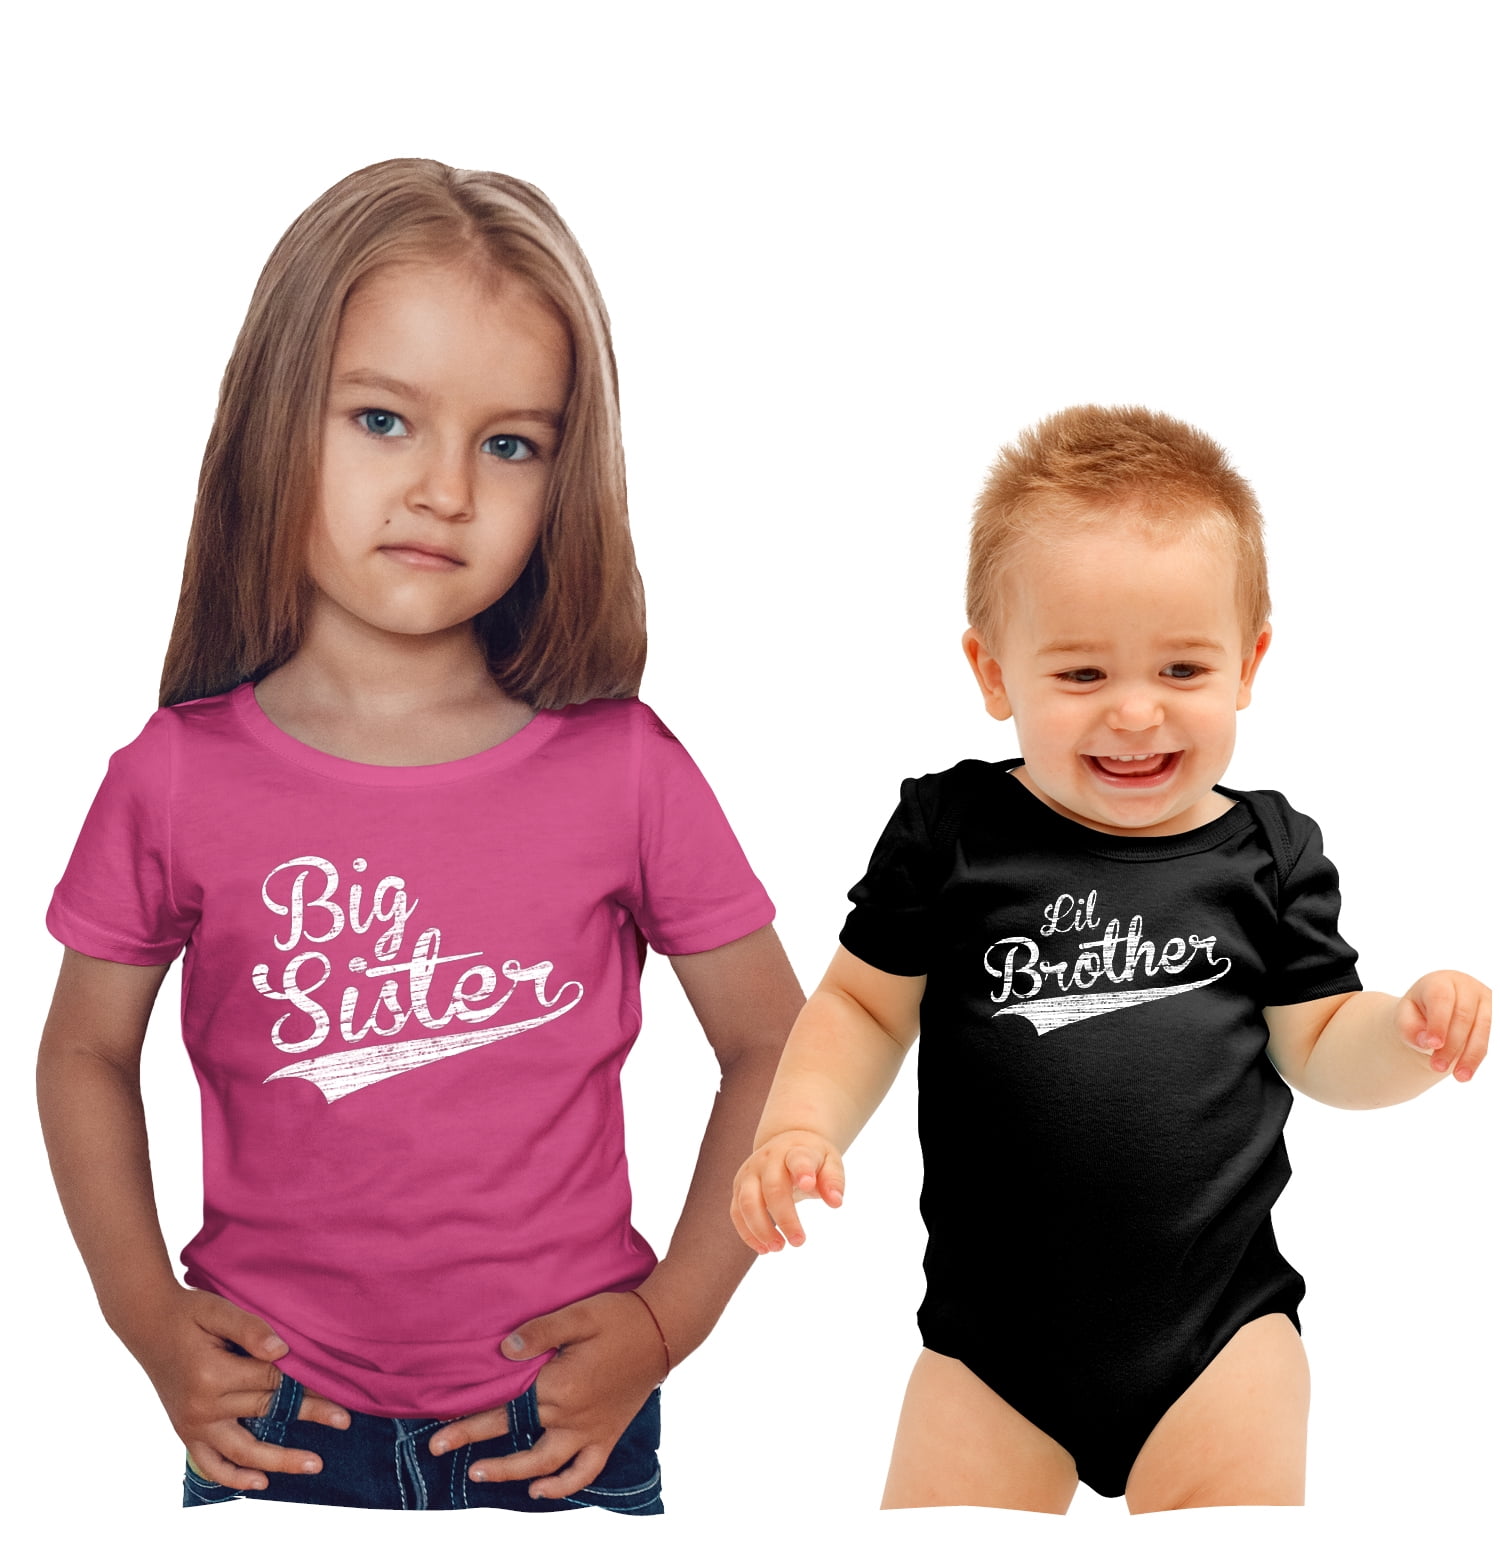 Big Sister Little Brother Outfit Matching Shirts Sets Baby Newborn Outfits Shirt 